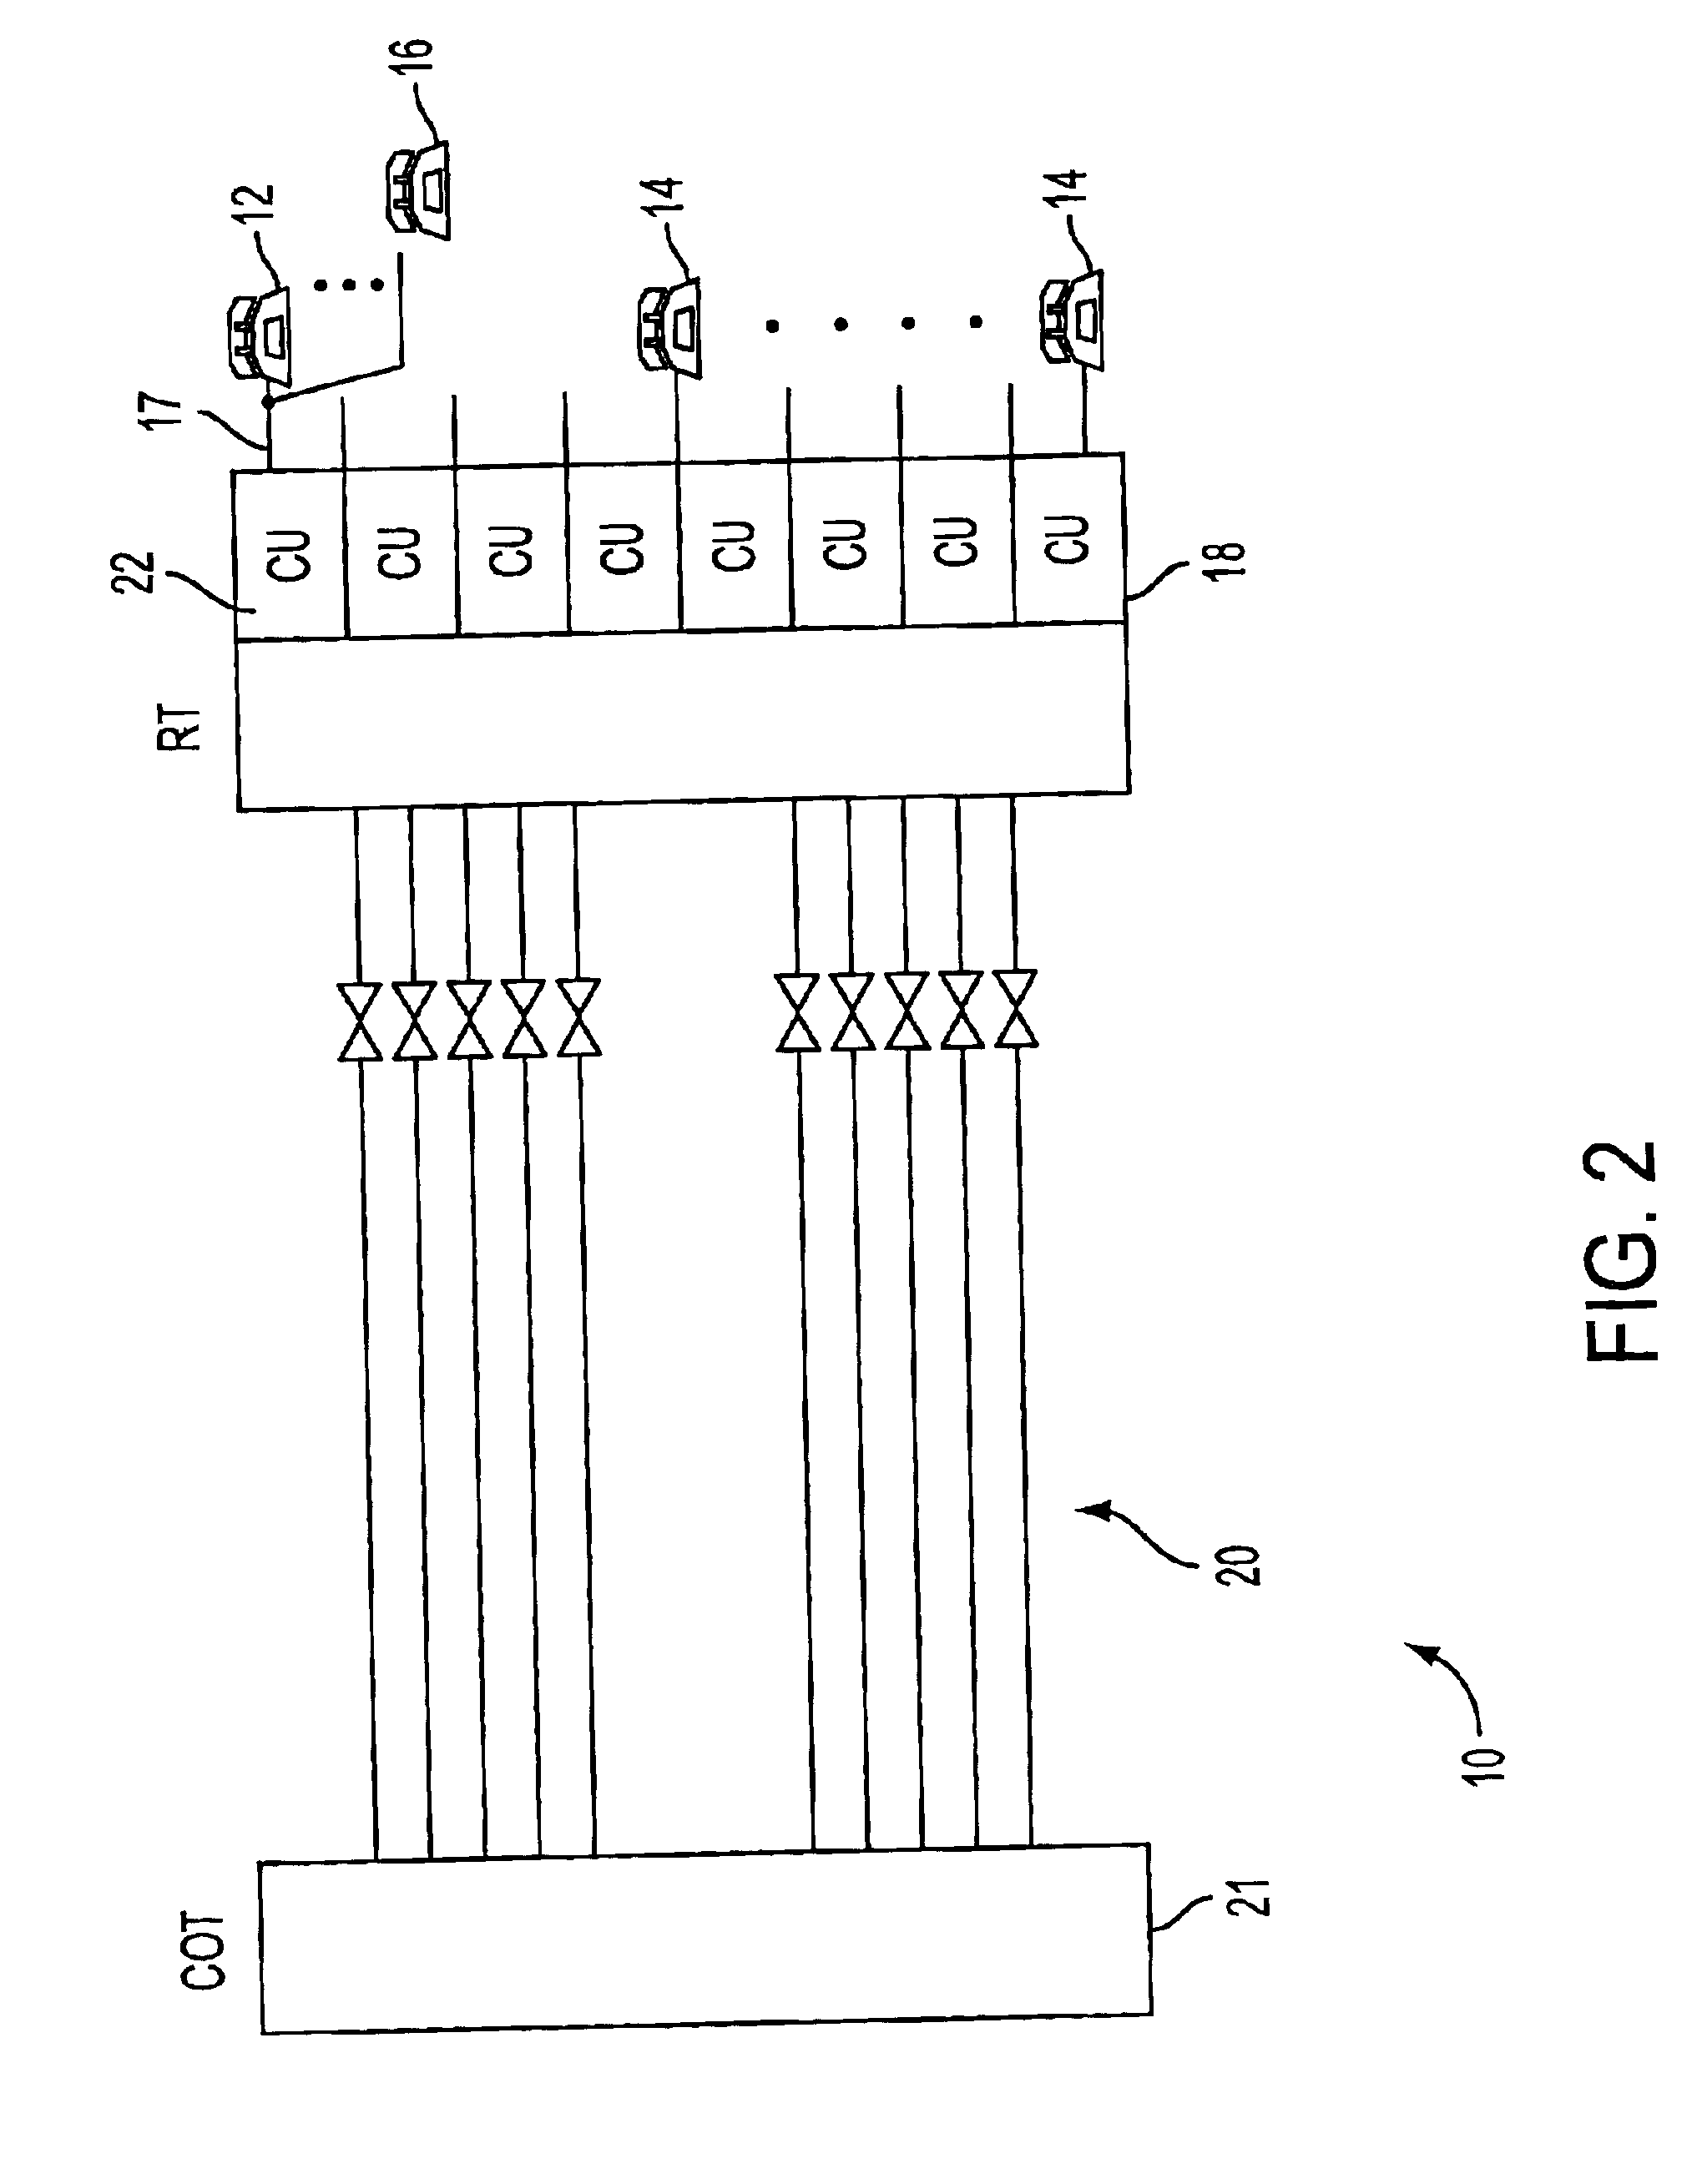 Method and apparatus for off-hook management of plural subscriber premises devices connected to same telephone line